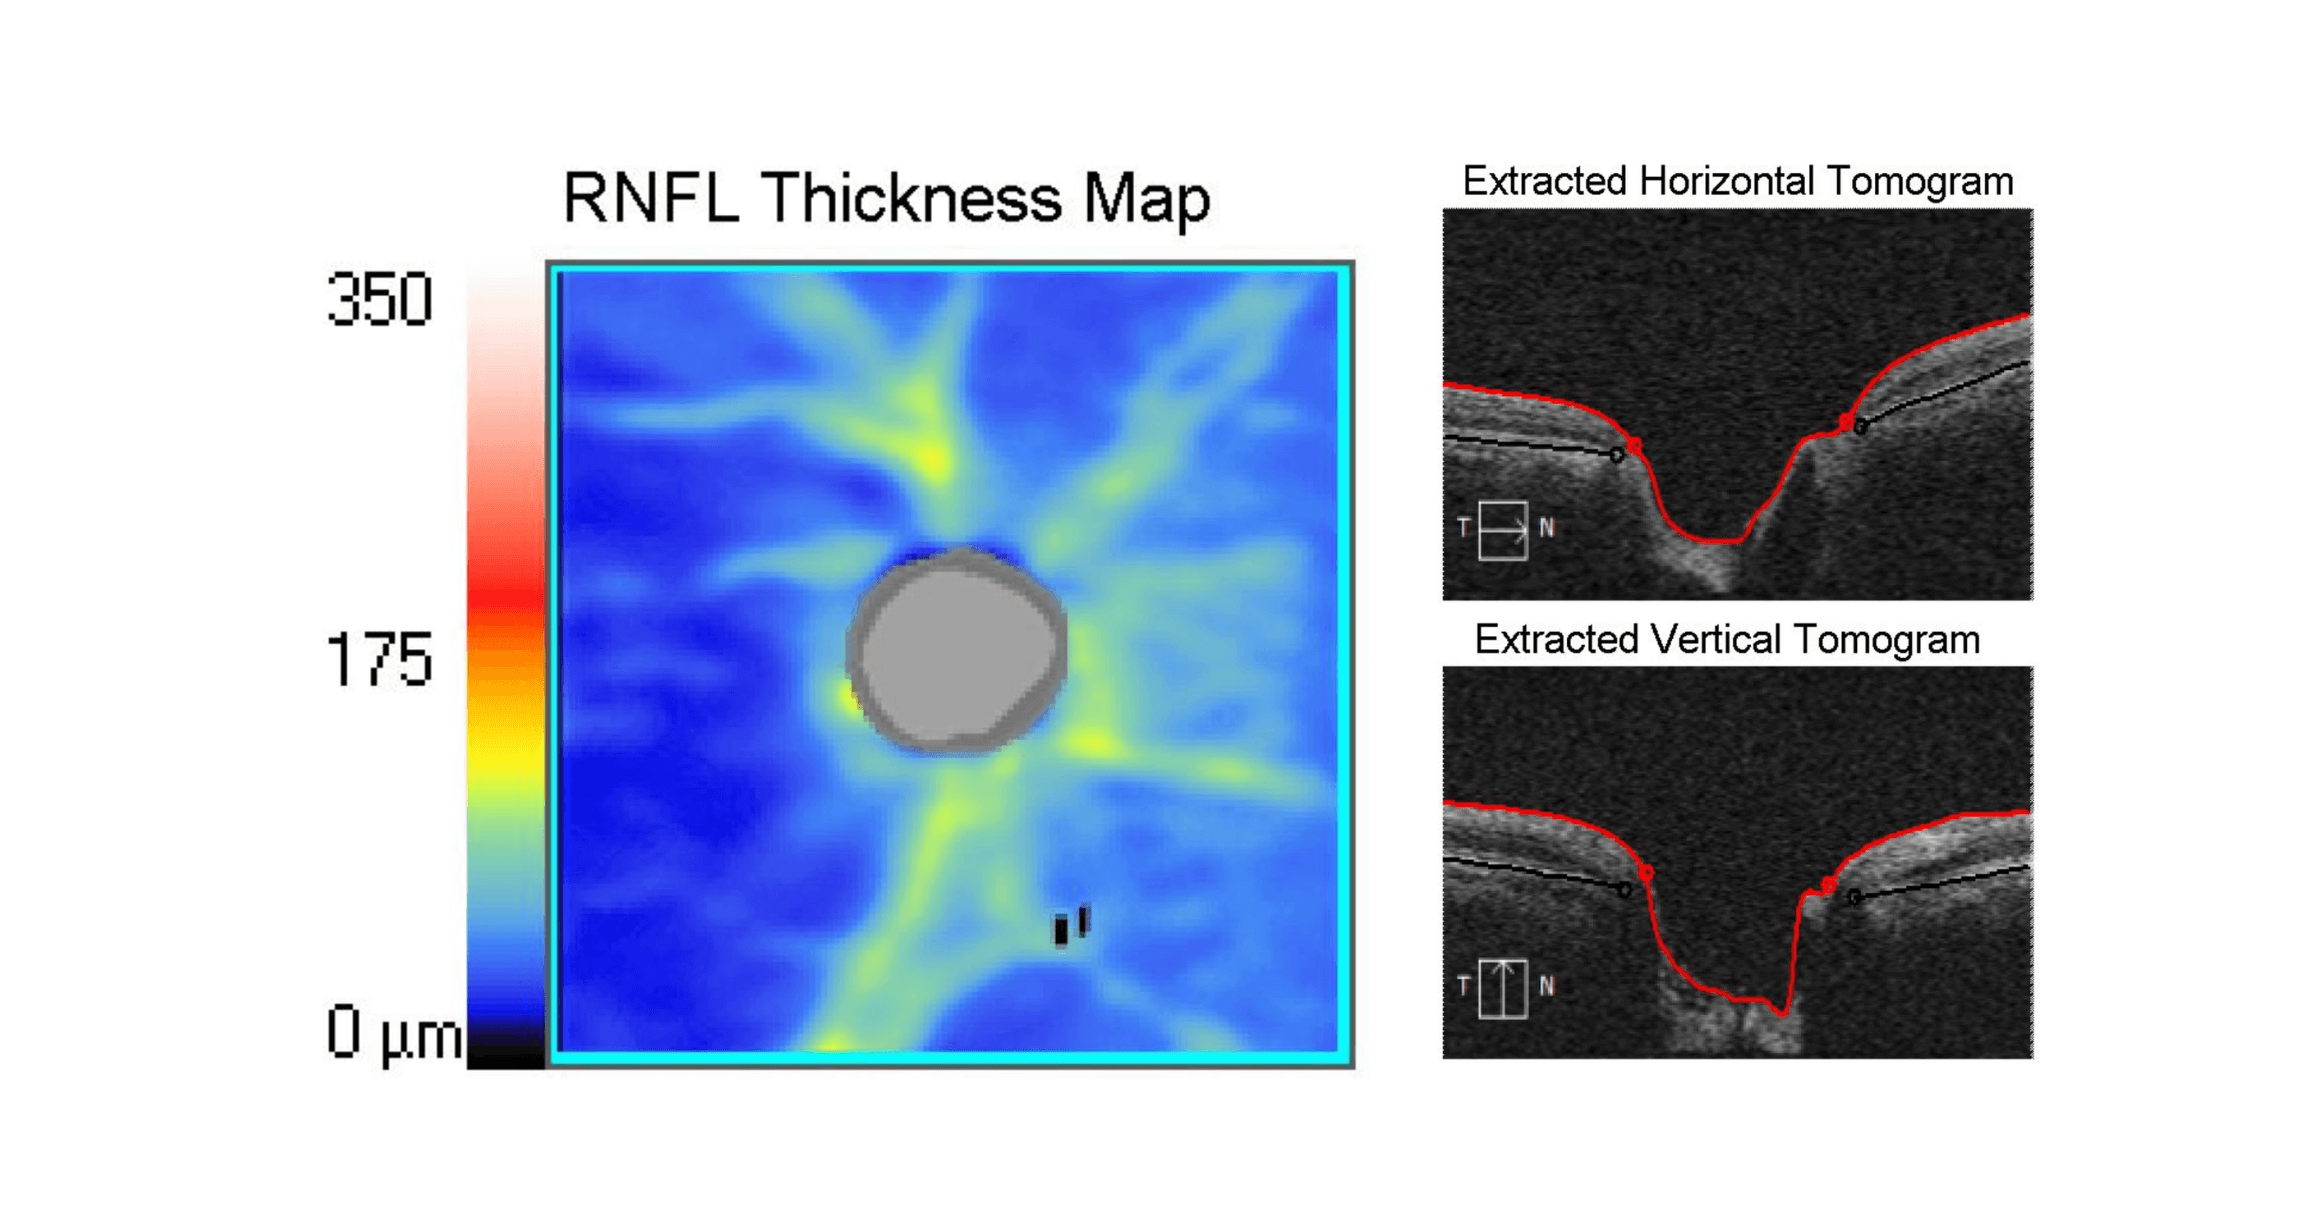 OCT scan results showing the retinal nerve fibre layer of an eye with moderate glaucoma